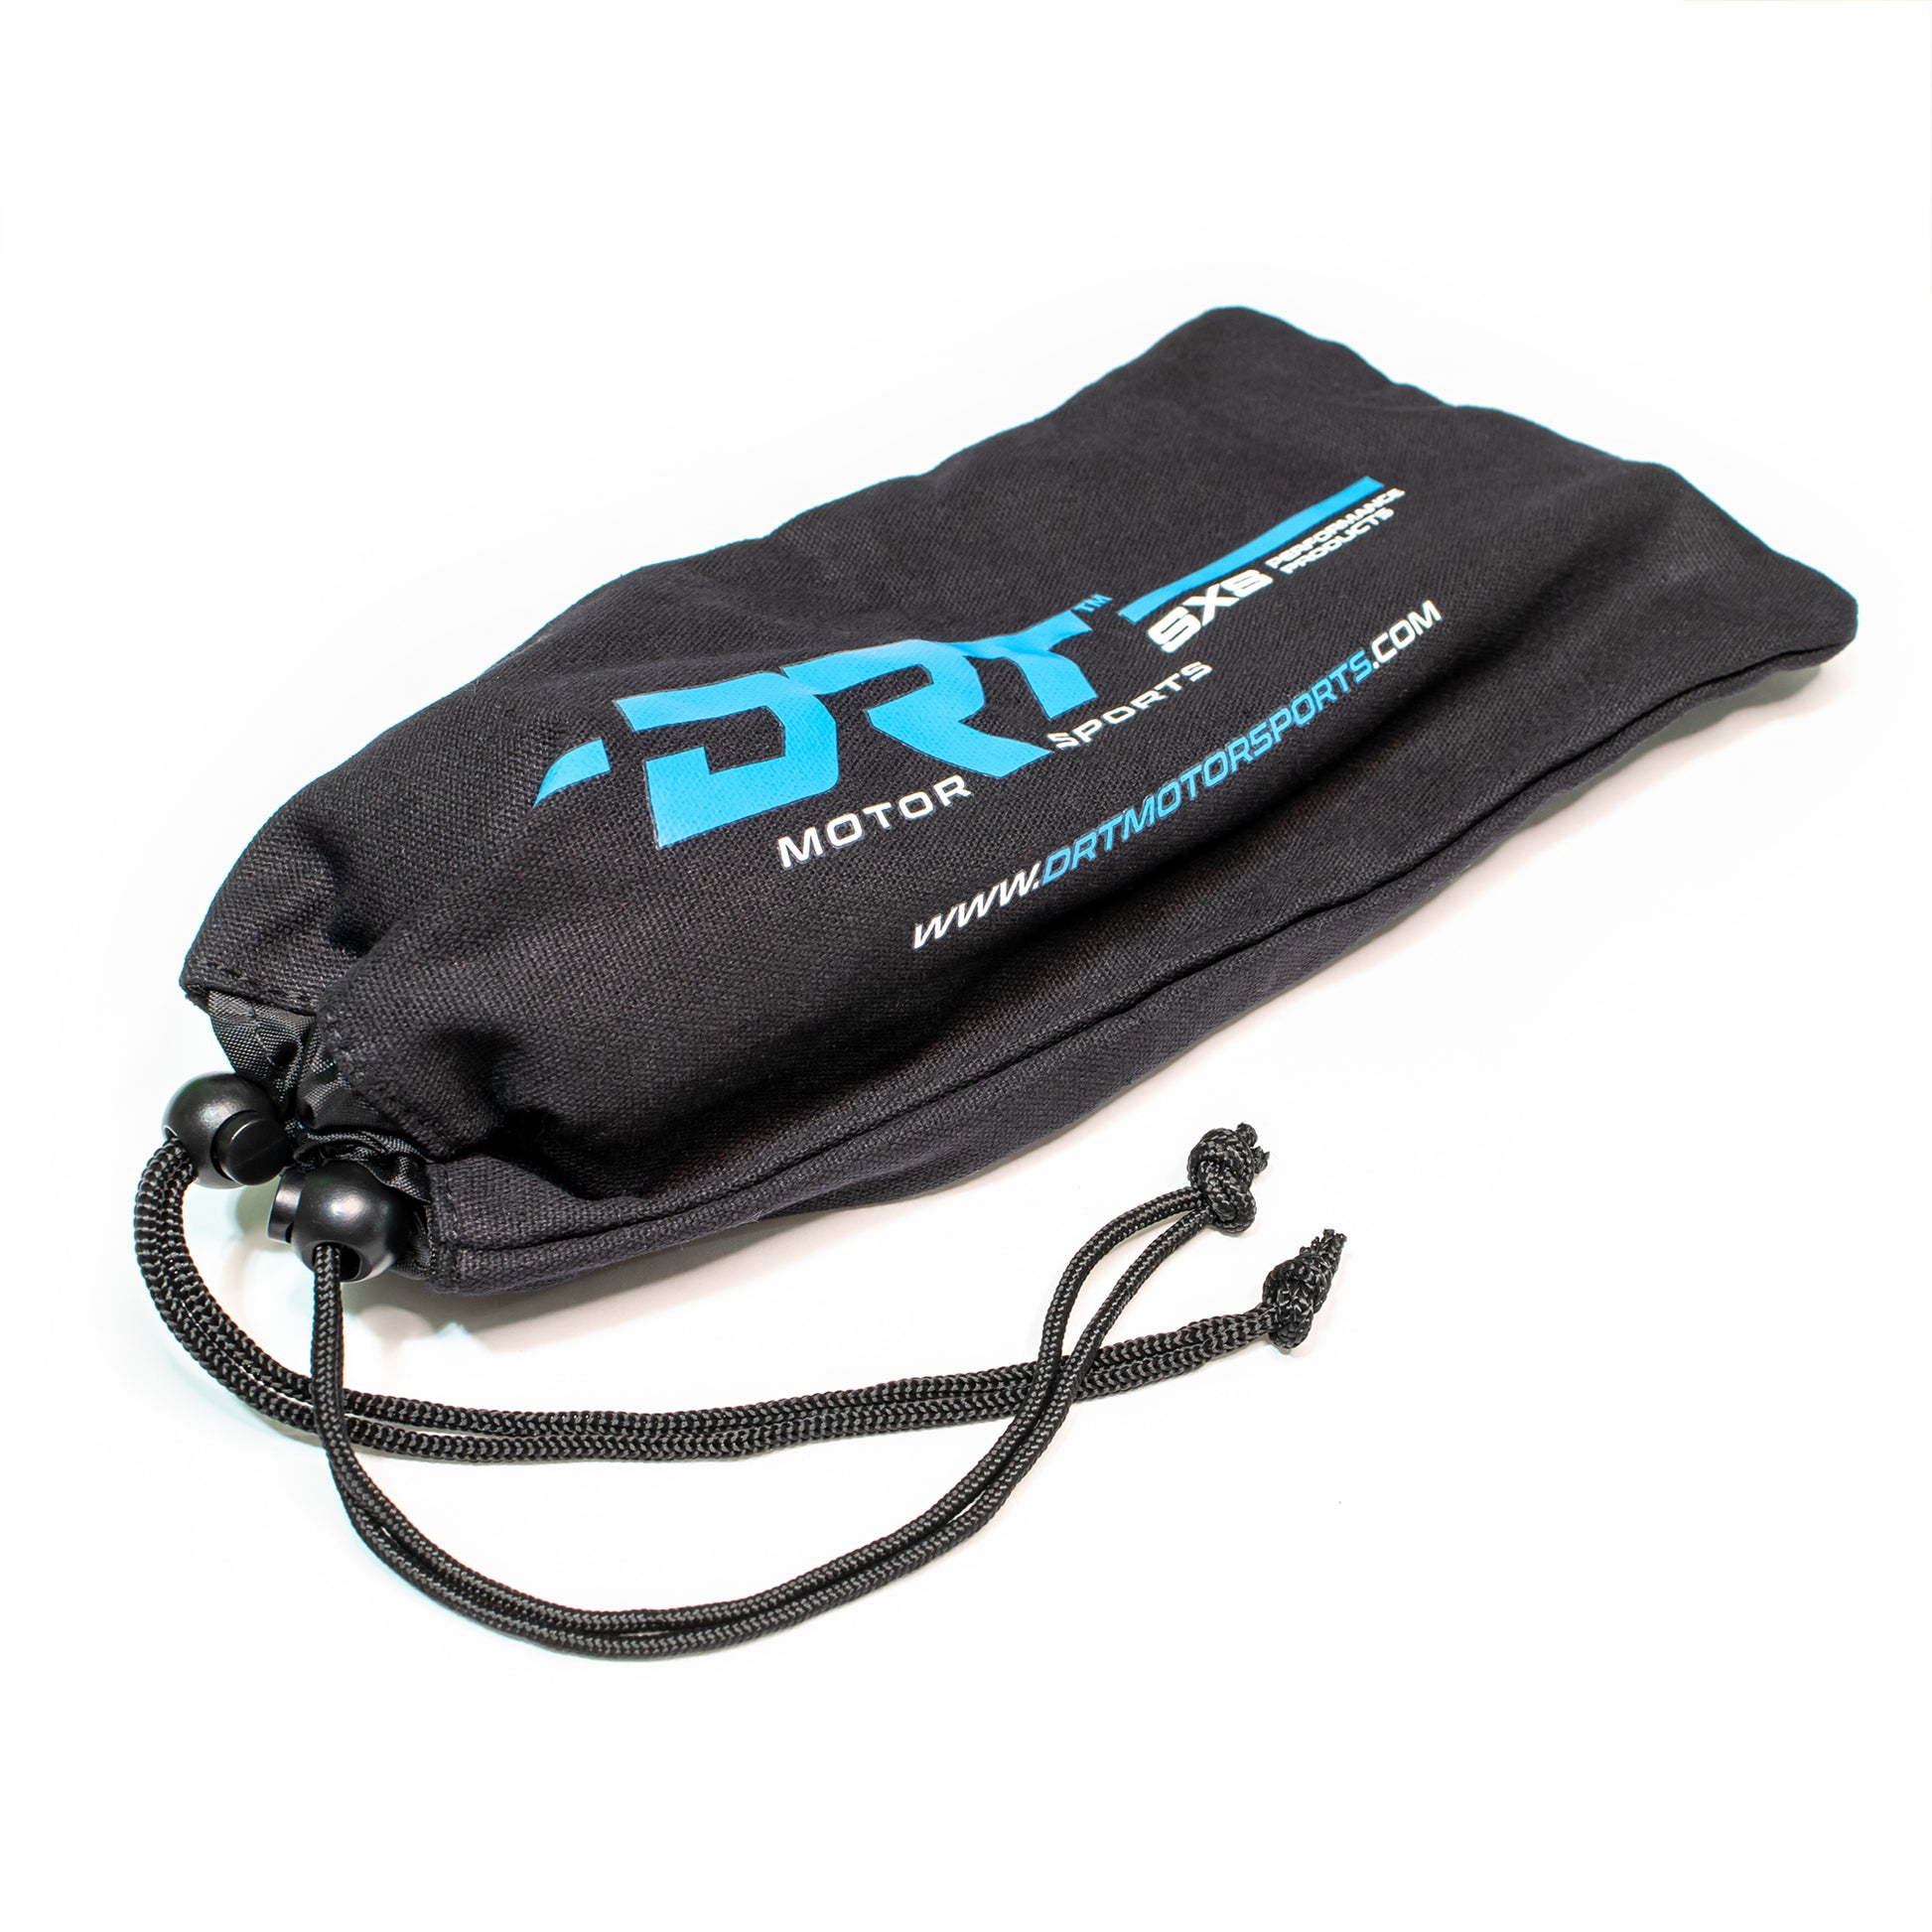 DRT Motorsports Can Am X3 Belt Replacement Tool Kit bag view